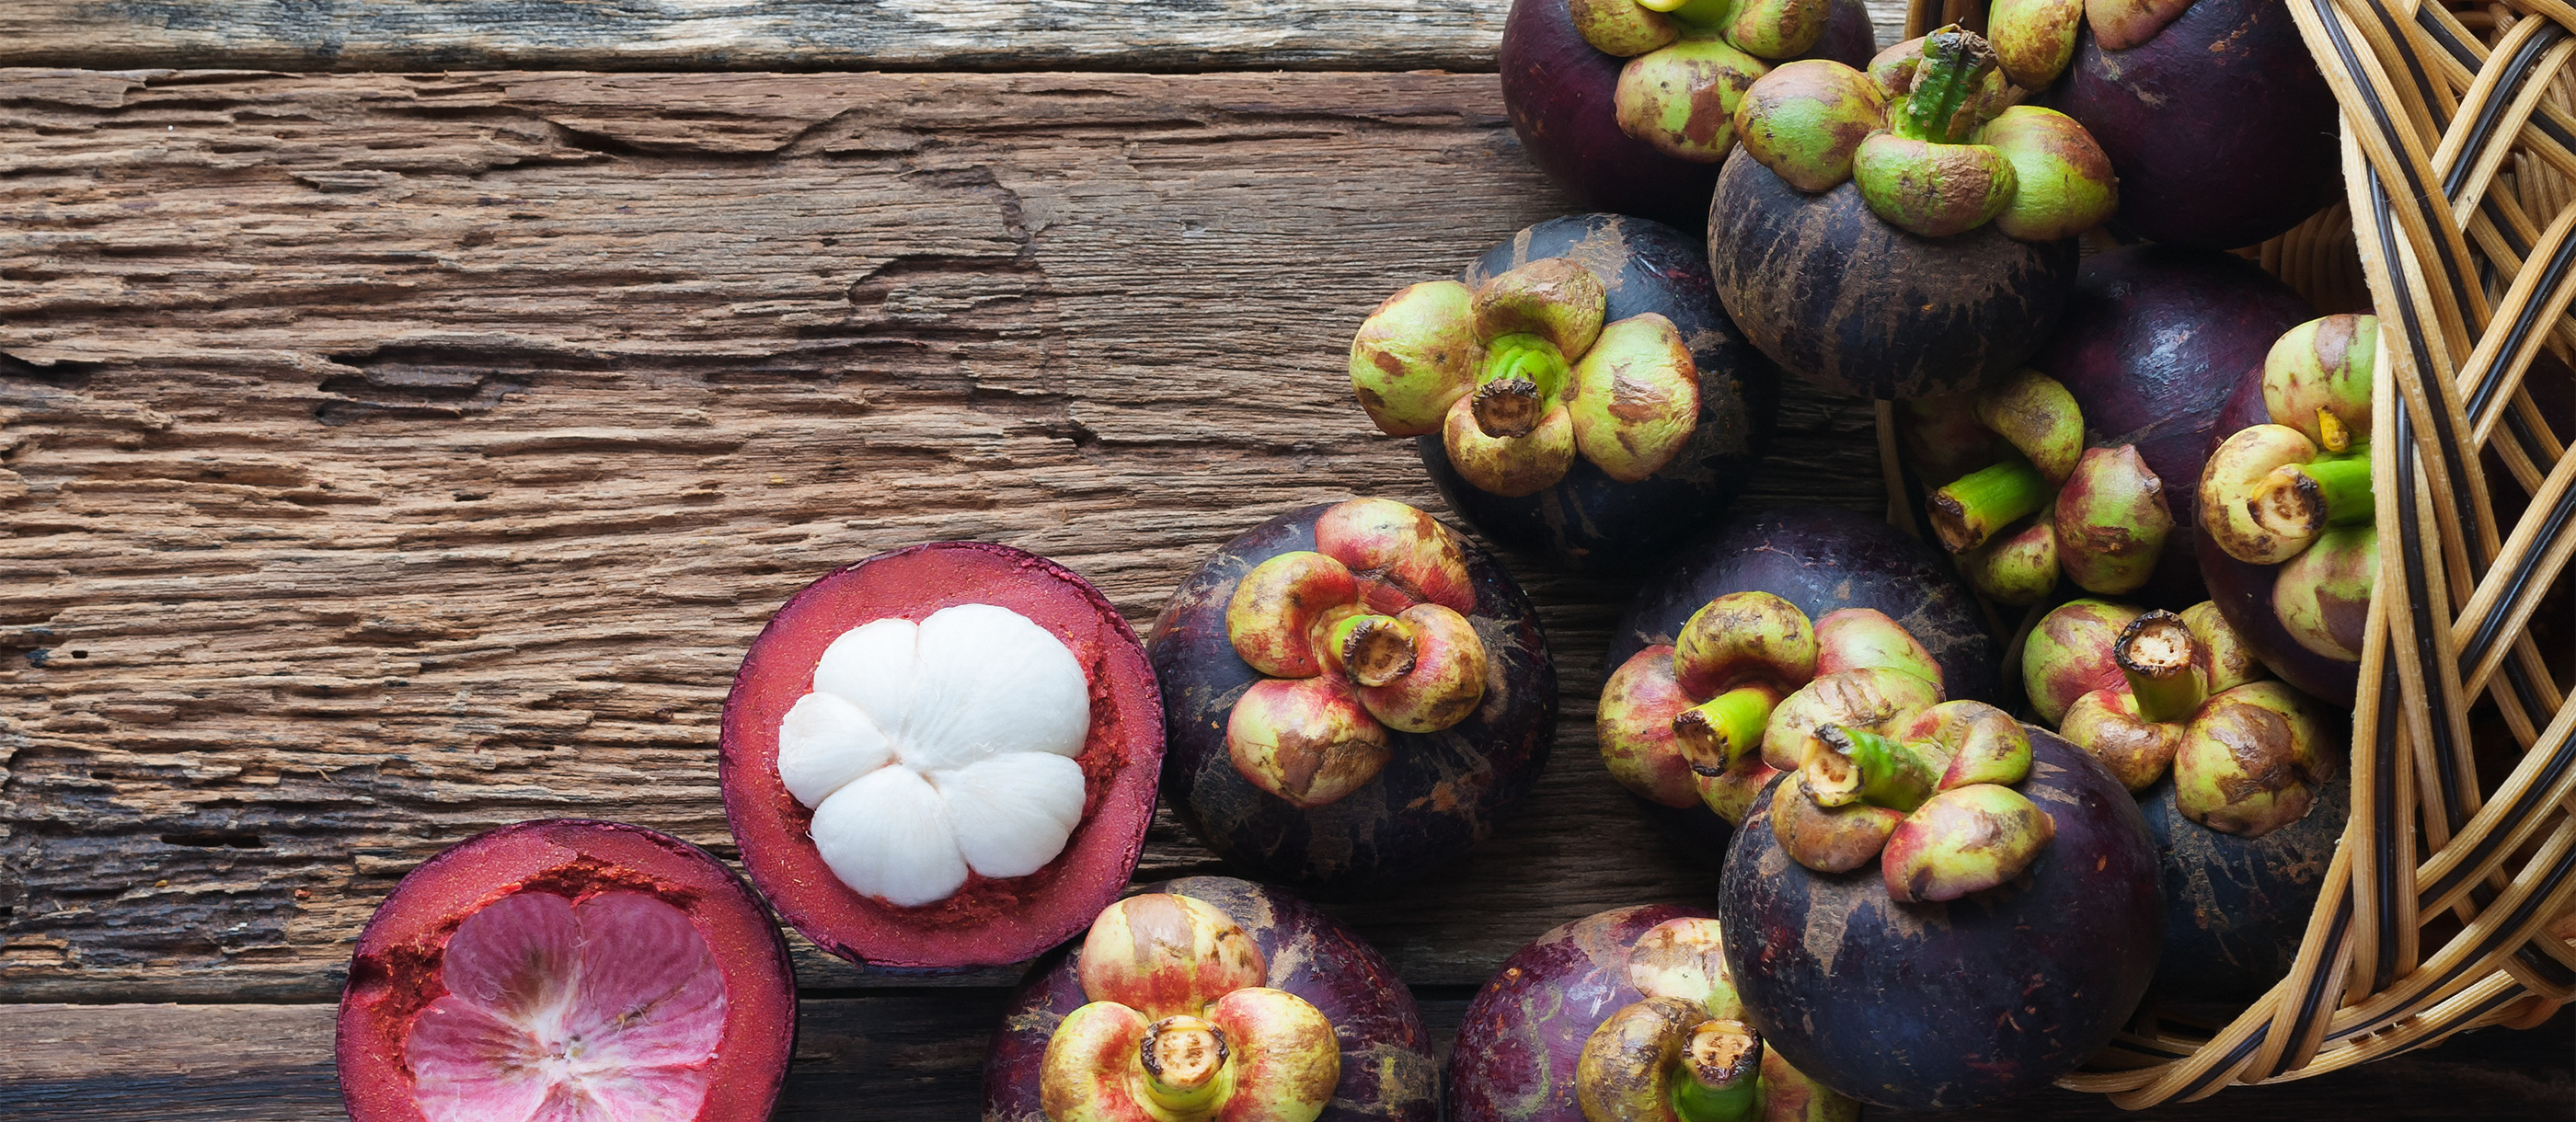 Mangosteen: Local Tropical Fruit From Indonesia, Southeast Asia. 2800x1220 Dual Screen Wallpaper.